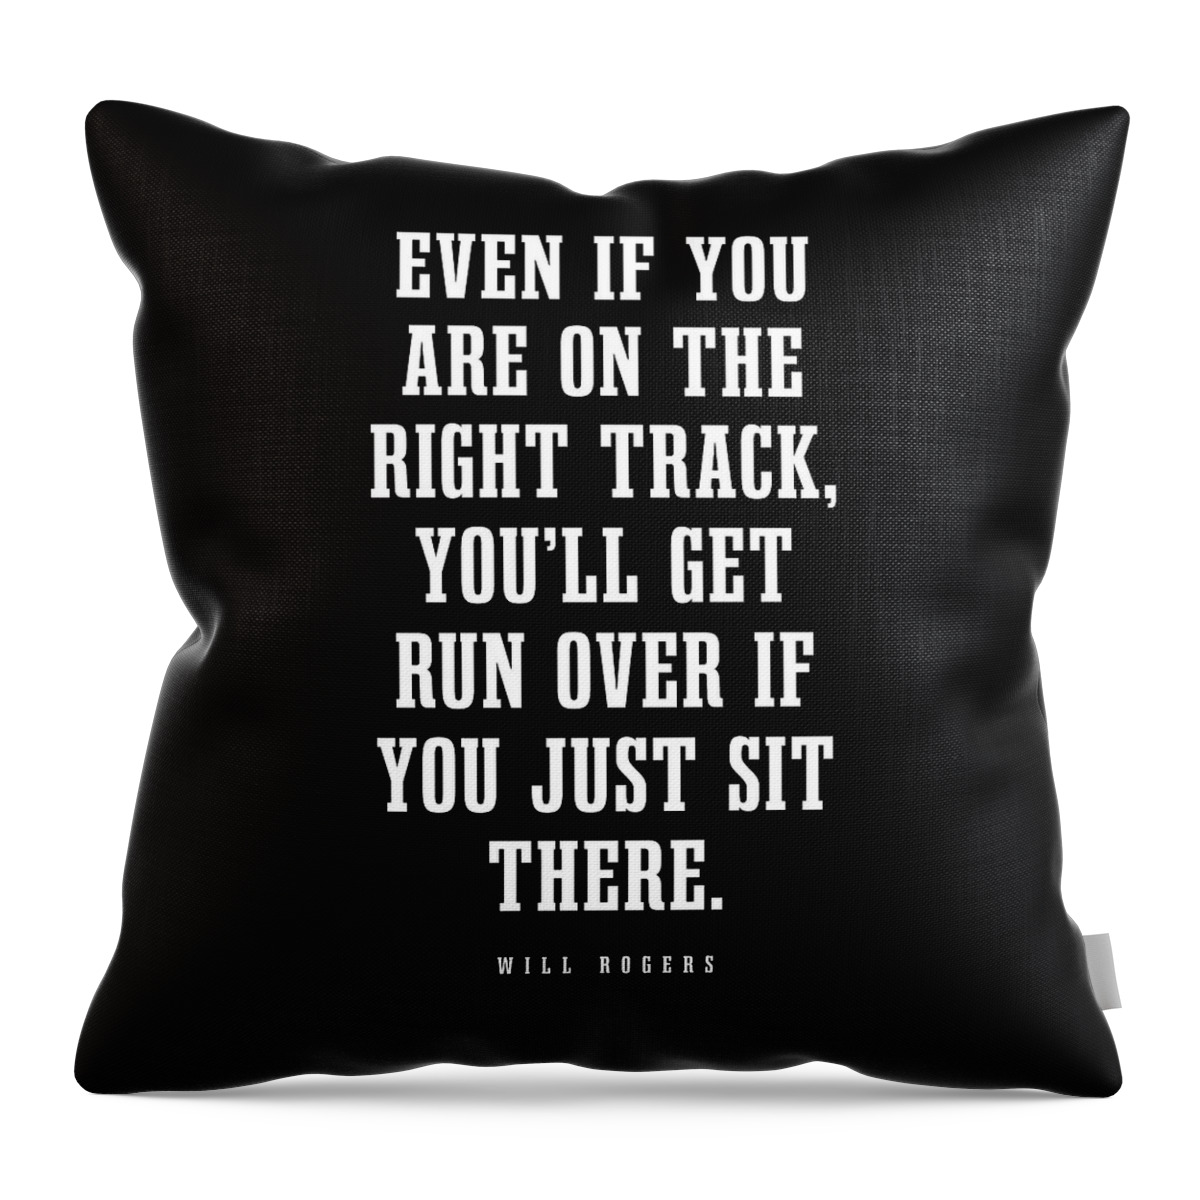 Even If You Are On The Right Track Throw Pillow featuring the digital art Even If You Are On The Right Track - Will Rogers Quote - Literature - Typography Print - Black by Studio Grafiikka